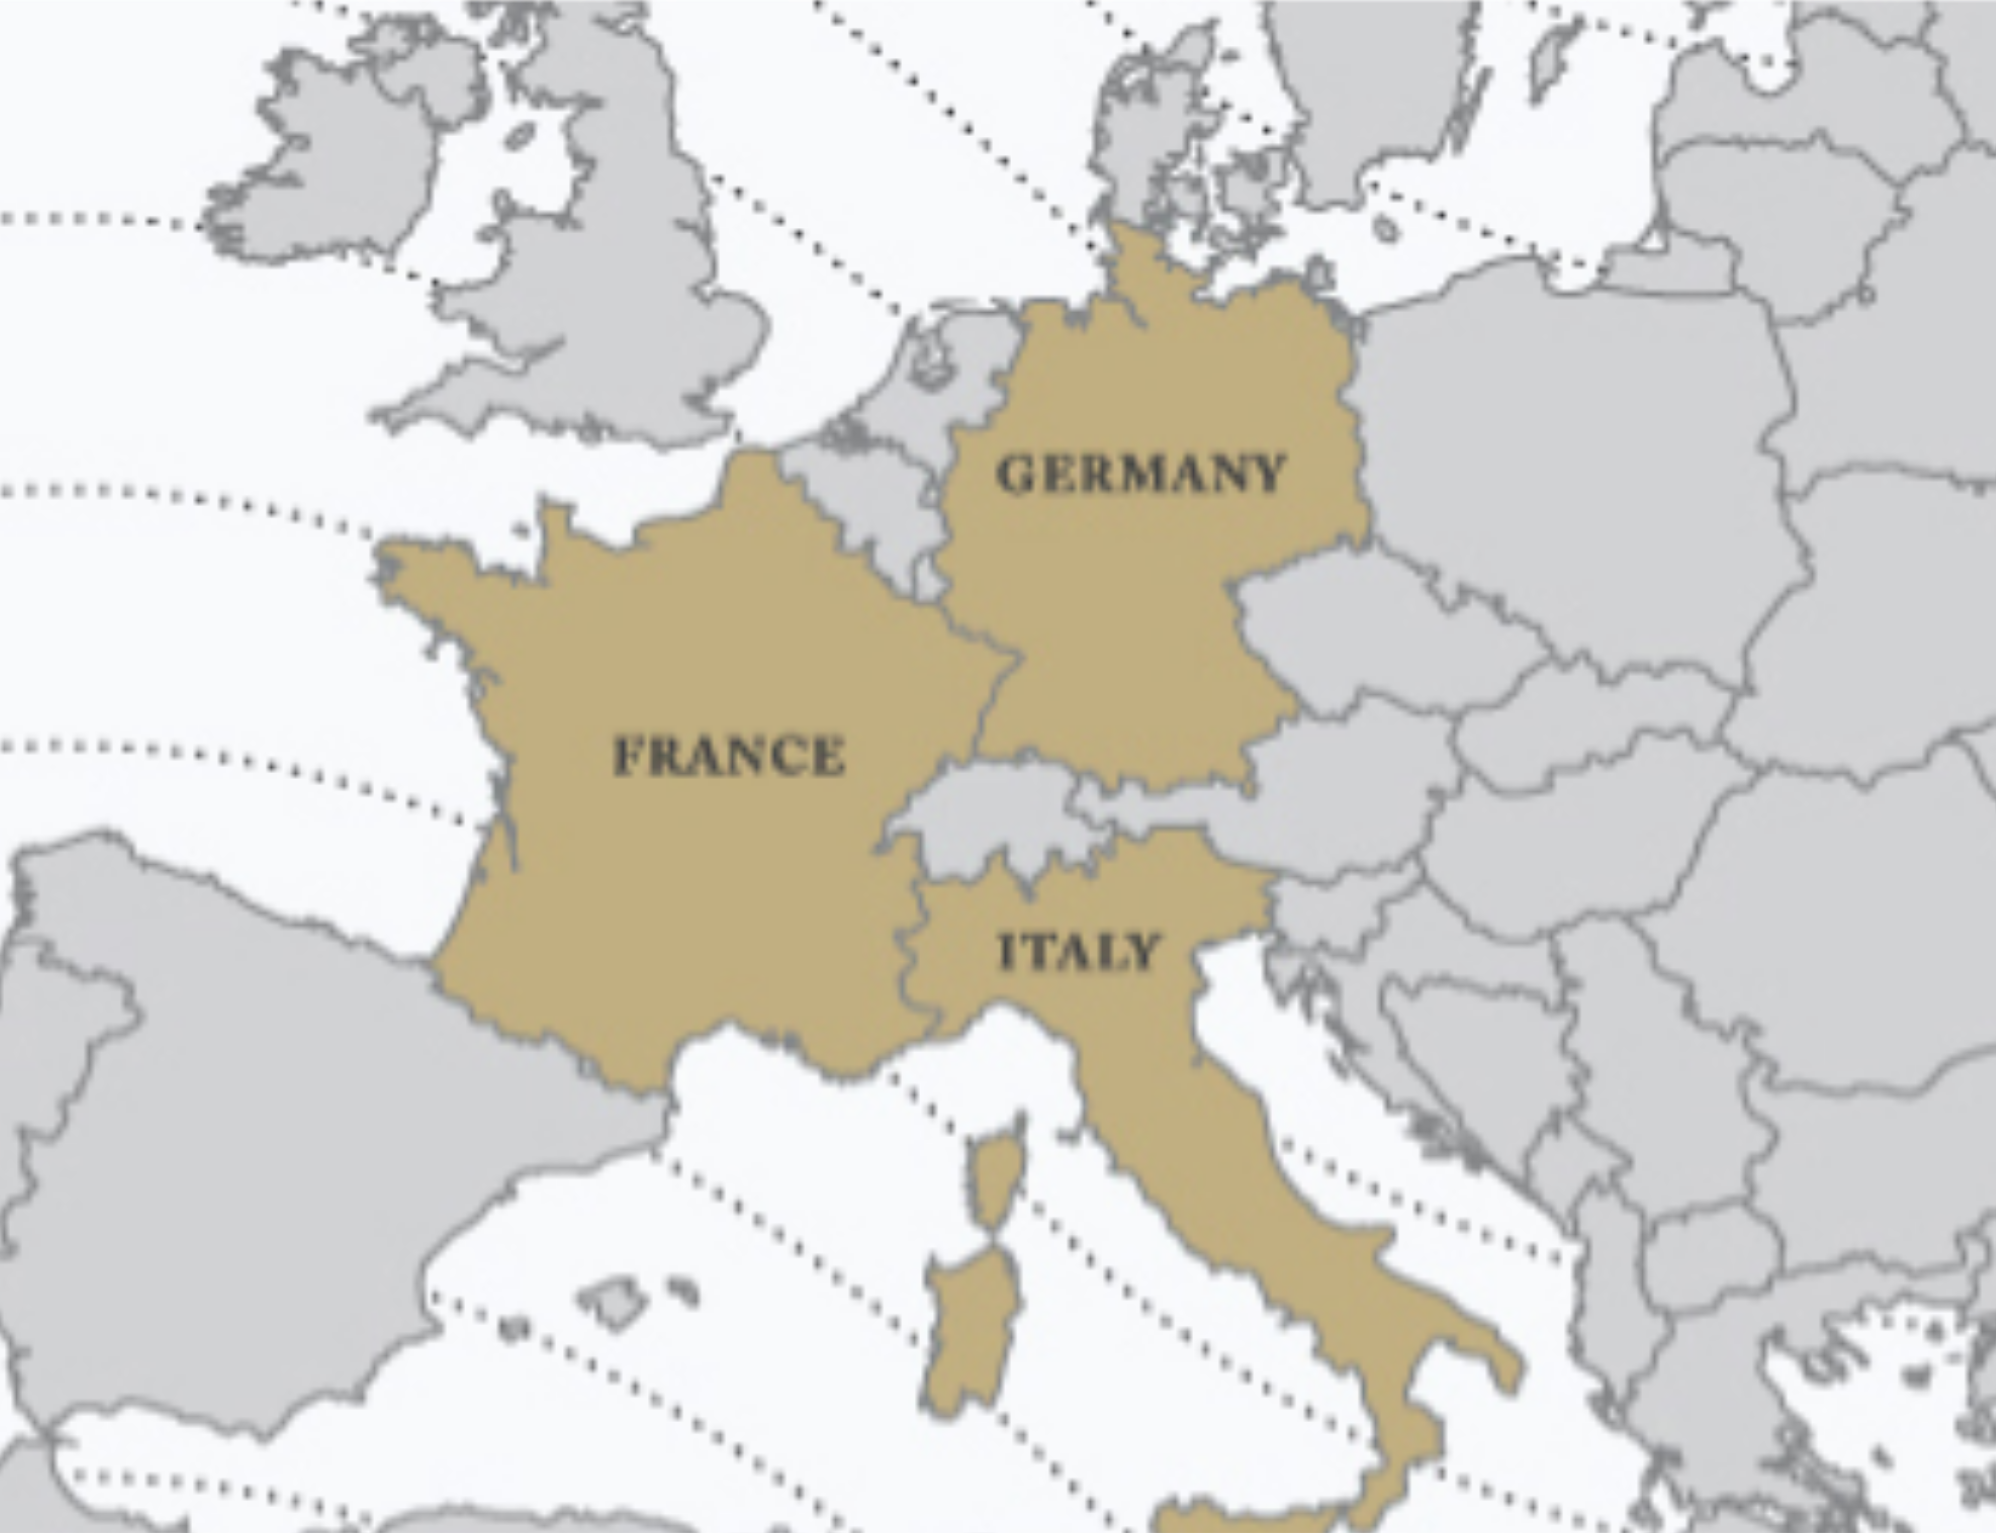 Italy, France and Germany